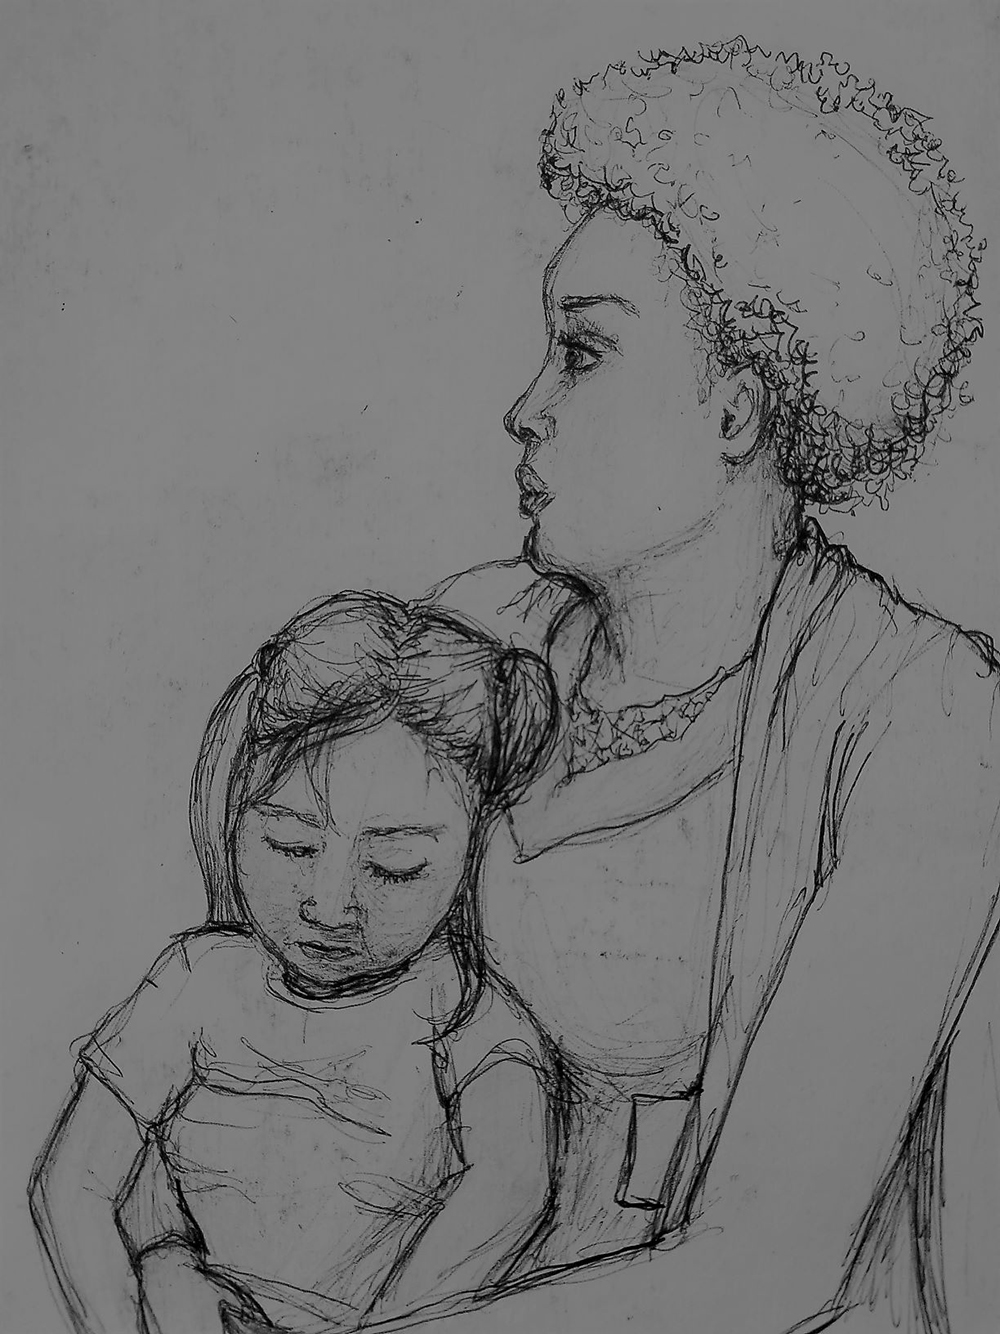 As photographs are not allowed inside these facilities, advocates make drawings that depict inner workings. Here, a depiction of an advocate caring for a detained child while her mother works on her case with another advocate. Drawn by volunteer and artist Molly McGowan.